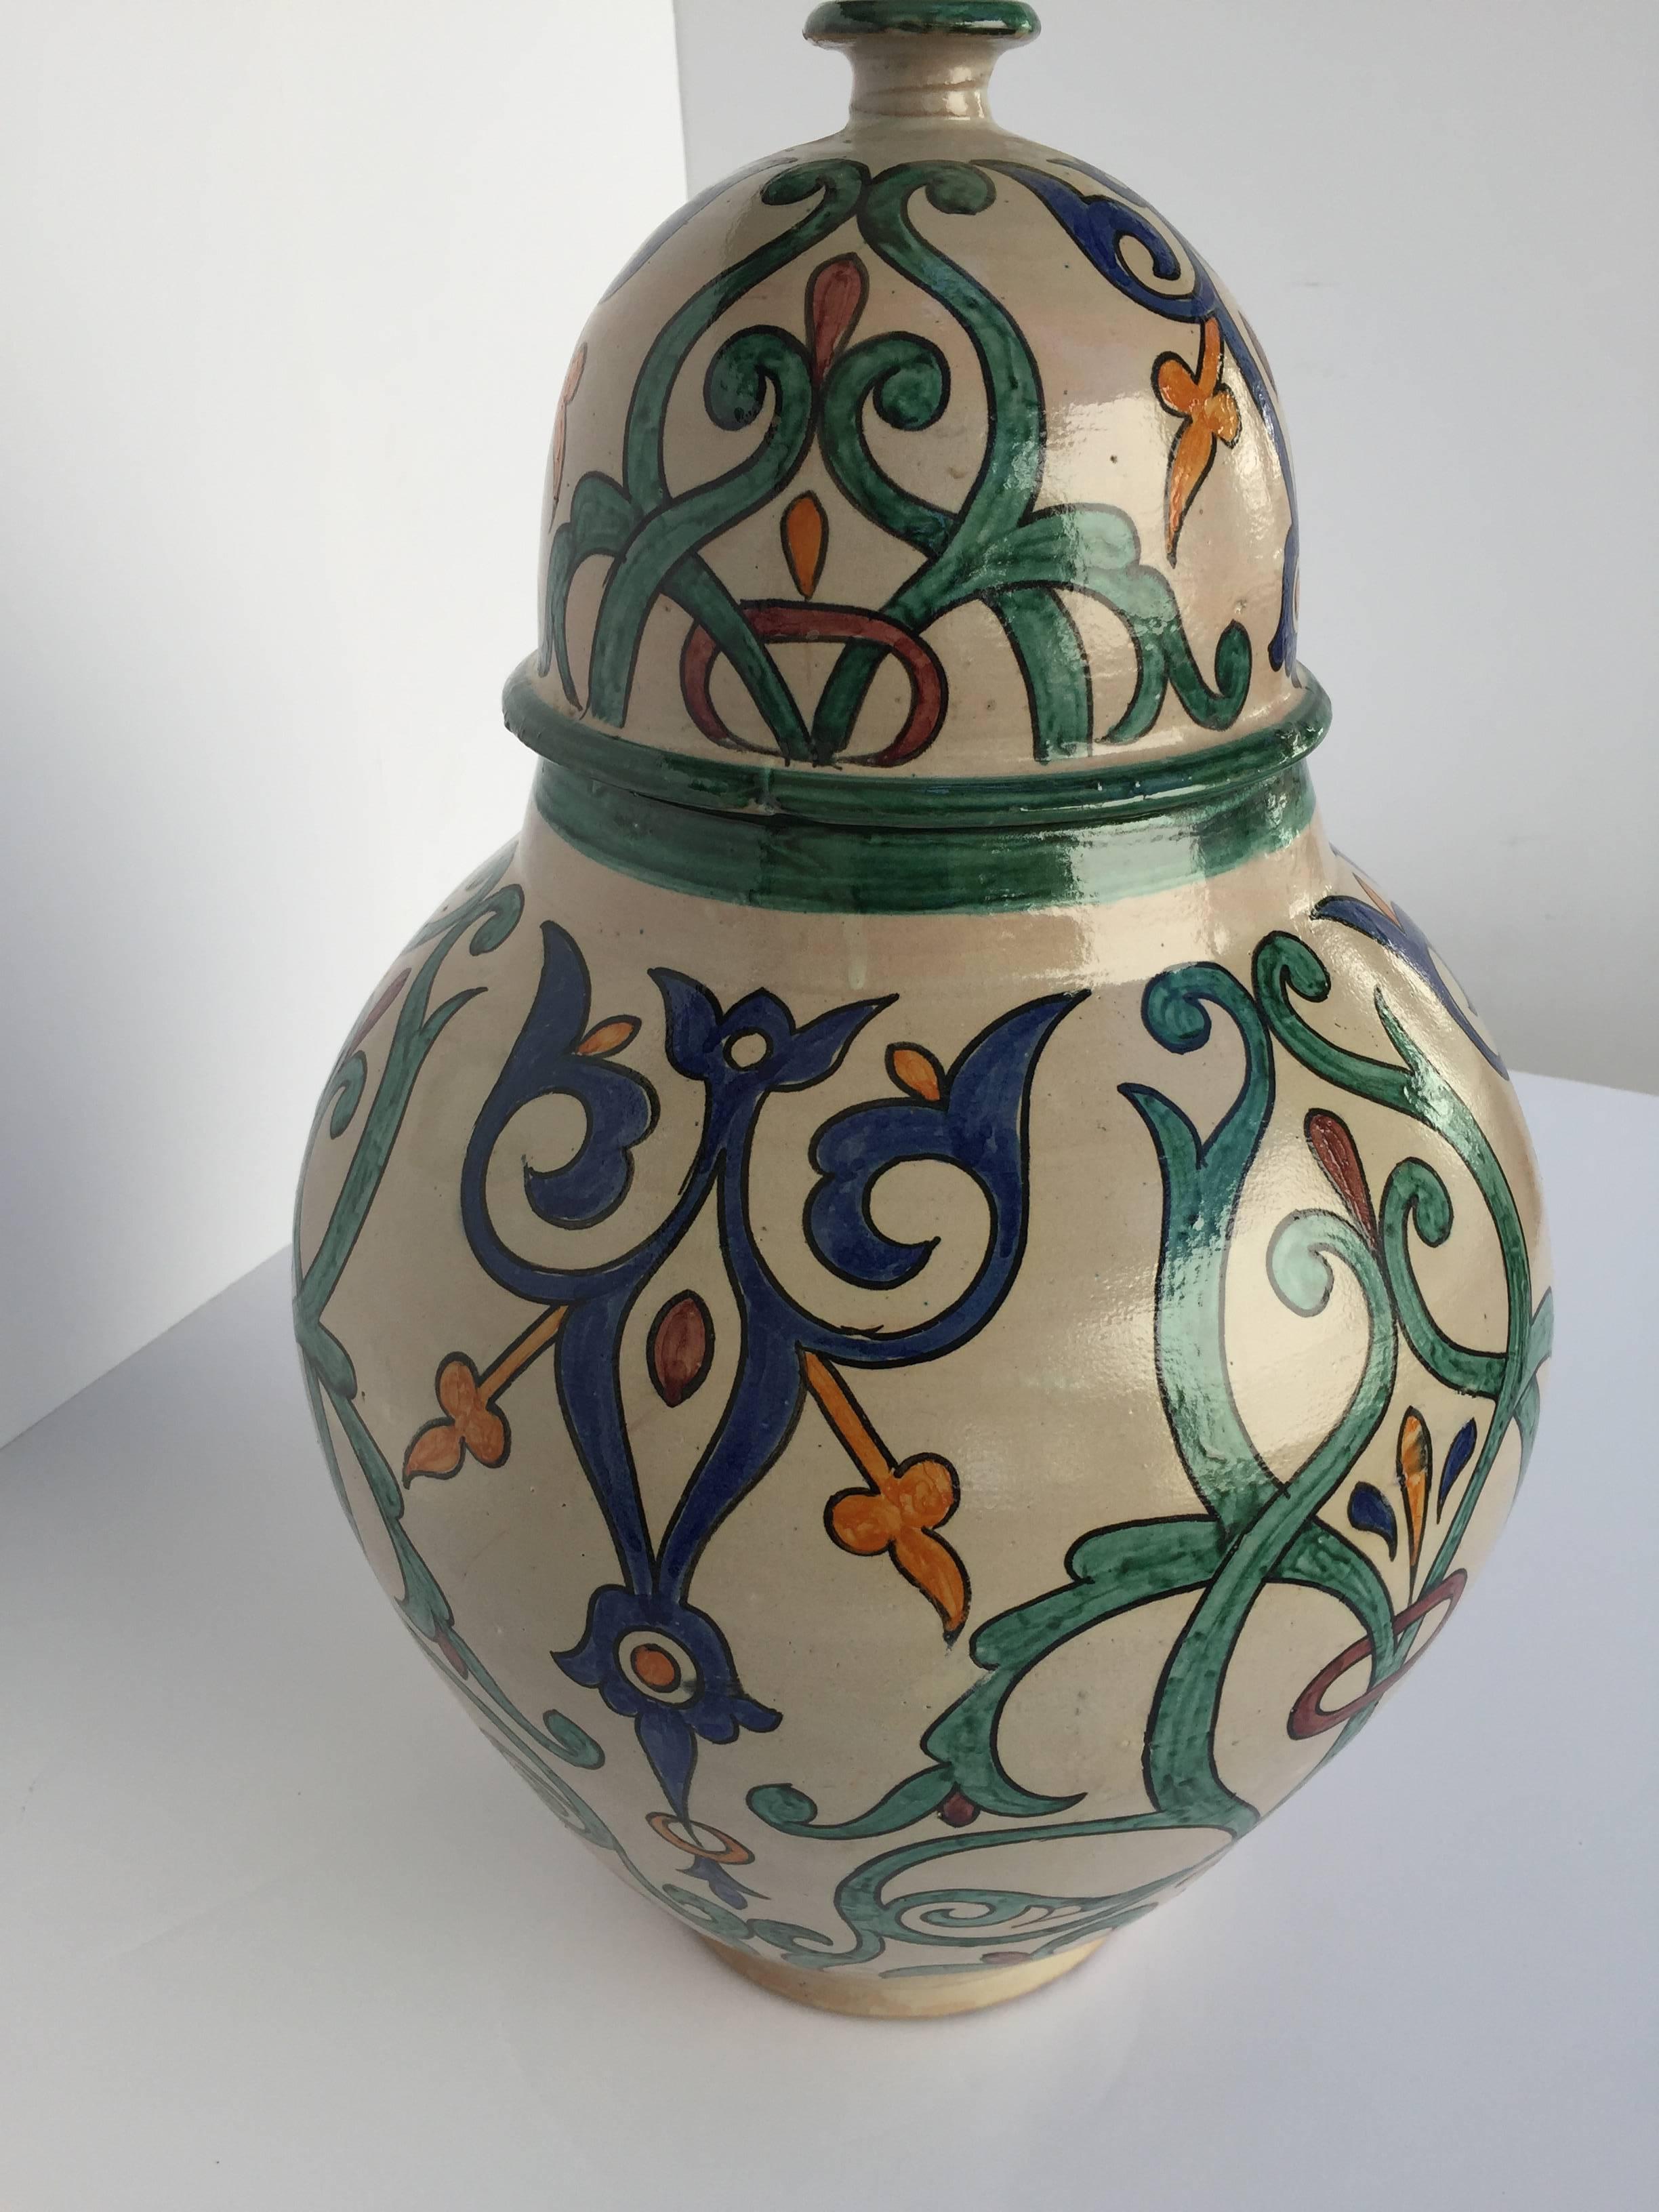 Large Moroccan glazed ceramic urn with lid from Fez. 
Granada style ceramic handcrafted and hand-painted with Moorish foliate designs in blue, teal, Safran and red colors on ivory background.
A pair is available price is for 1.
Large size: 25 in.